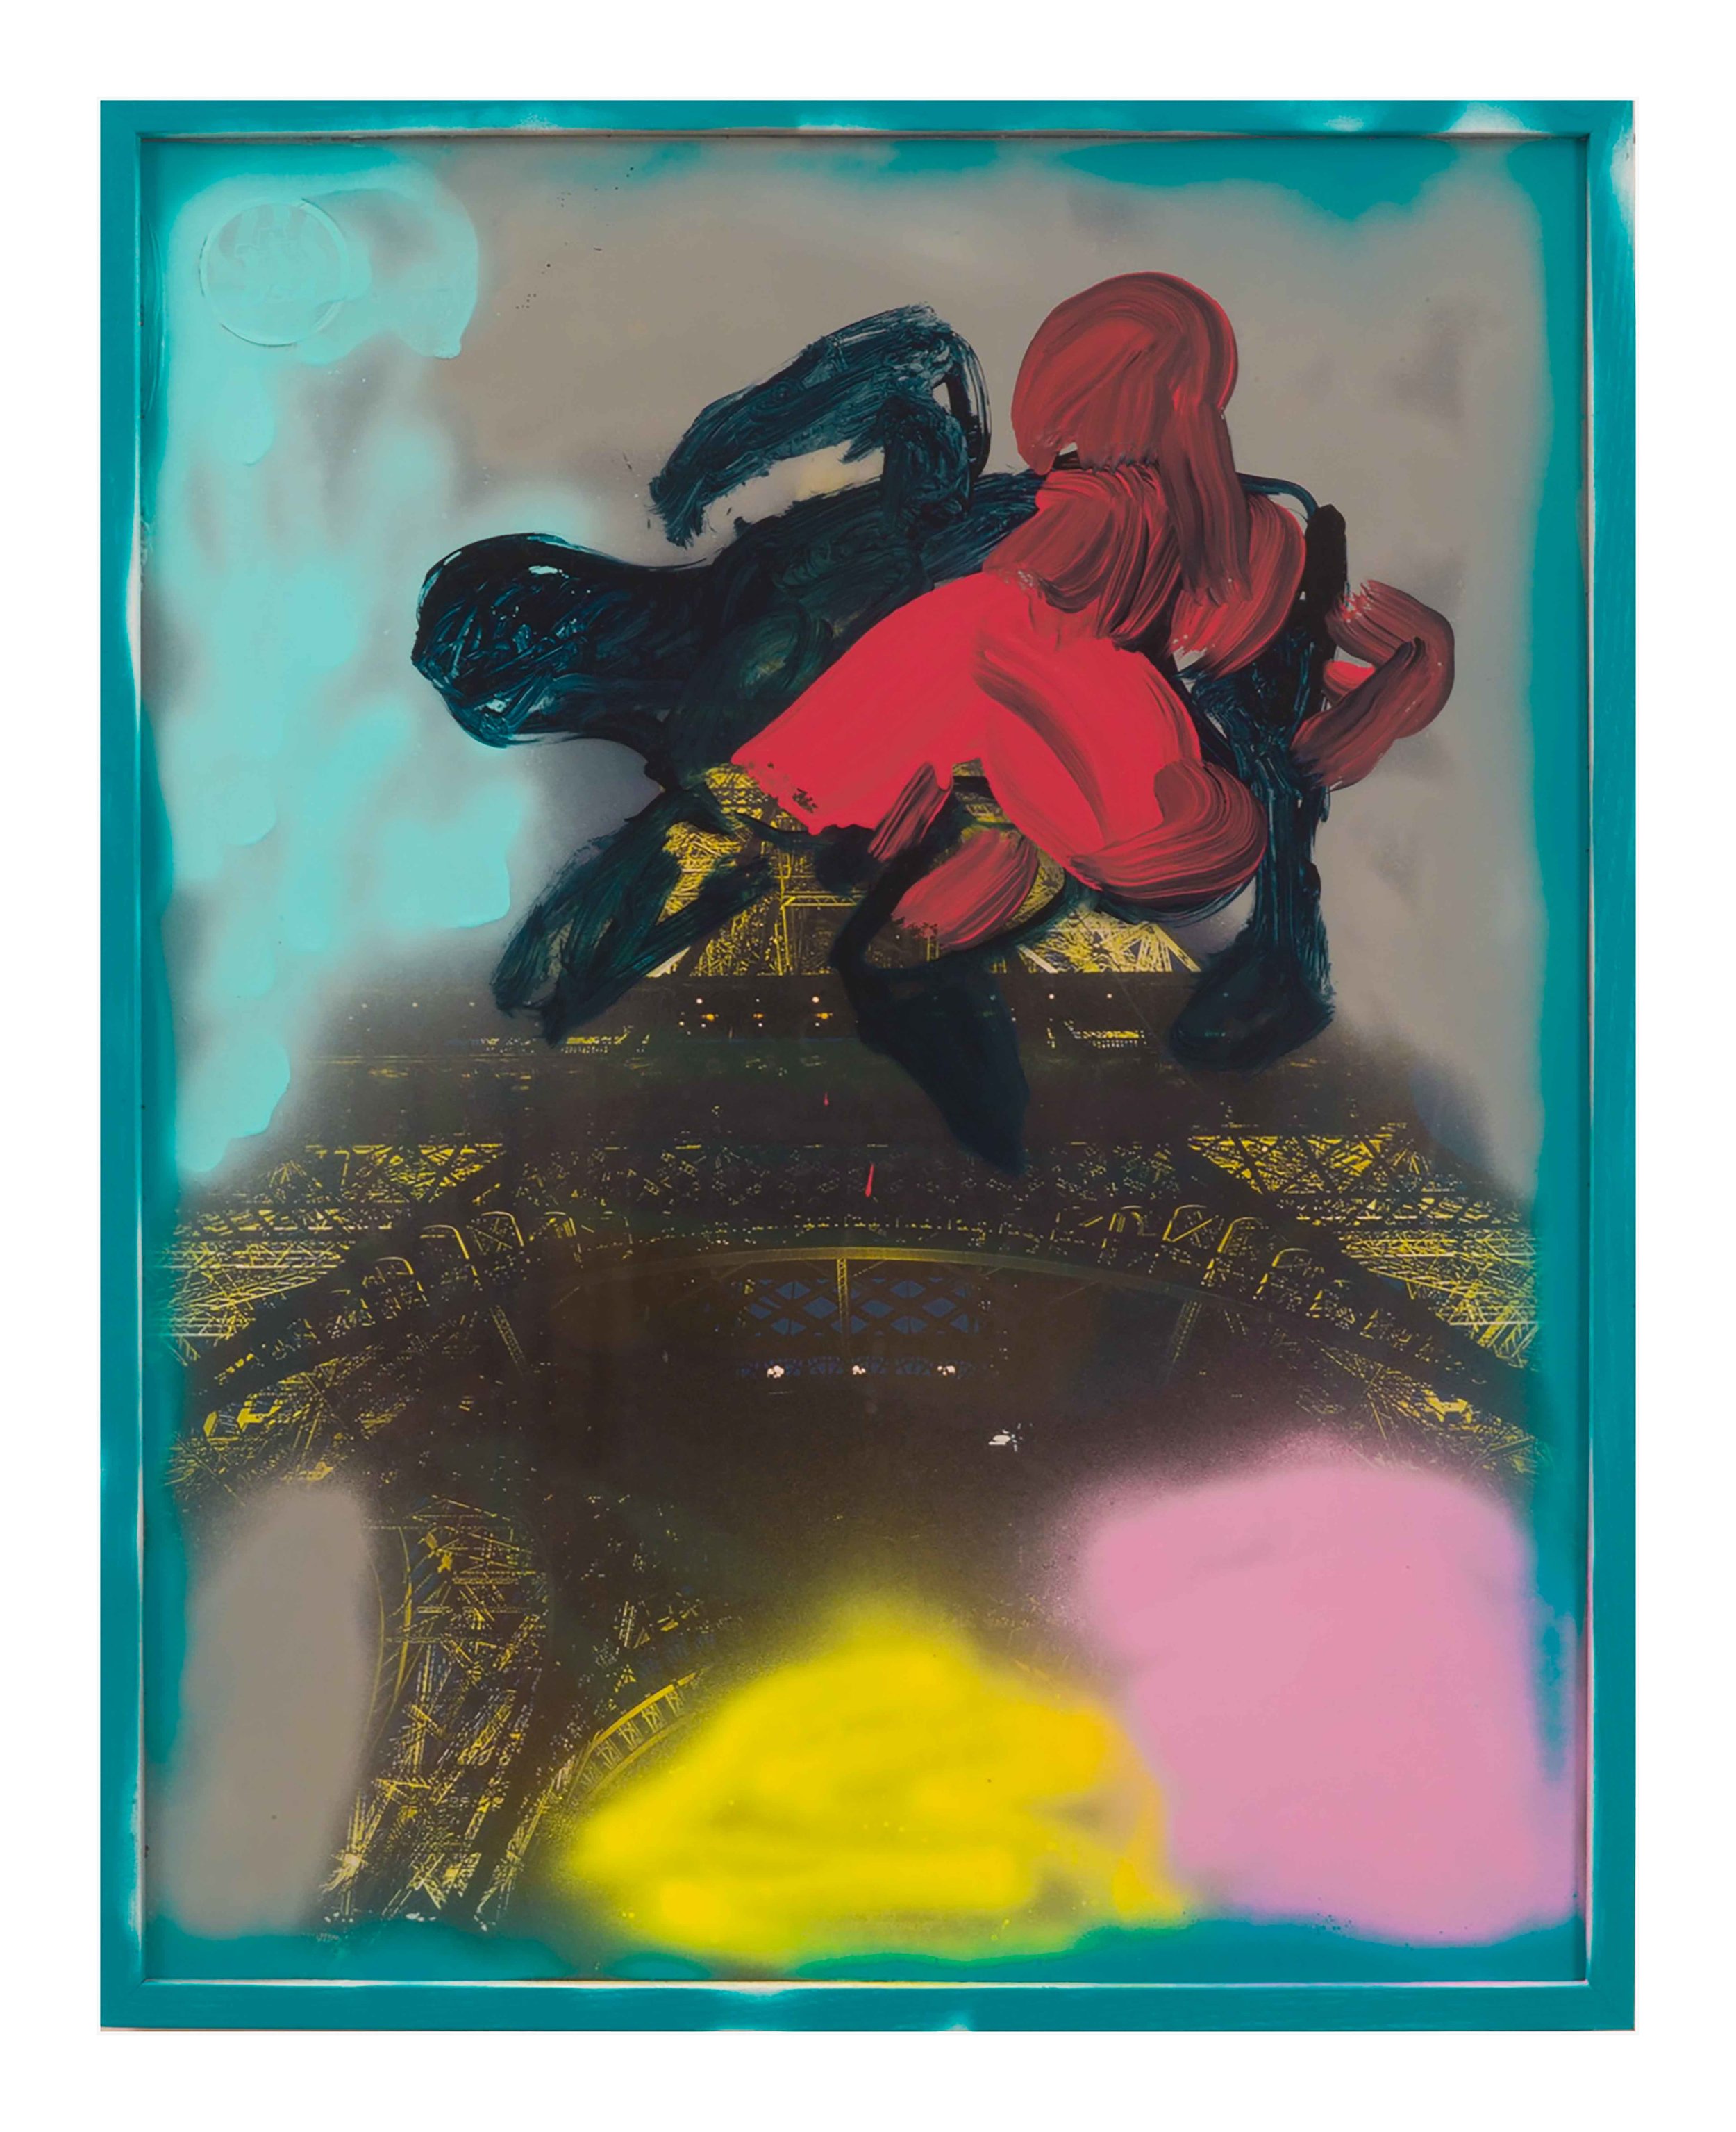  Drew Beattie and Ben Shepard  Fight in Paris &nbsp; 2015 acrylic and spray paint on framed poster 29 x 23 inches 